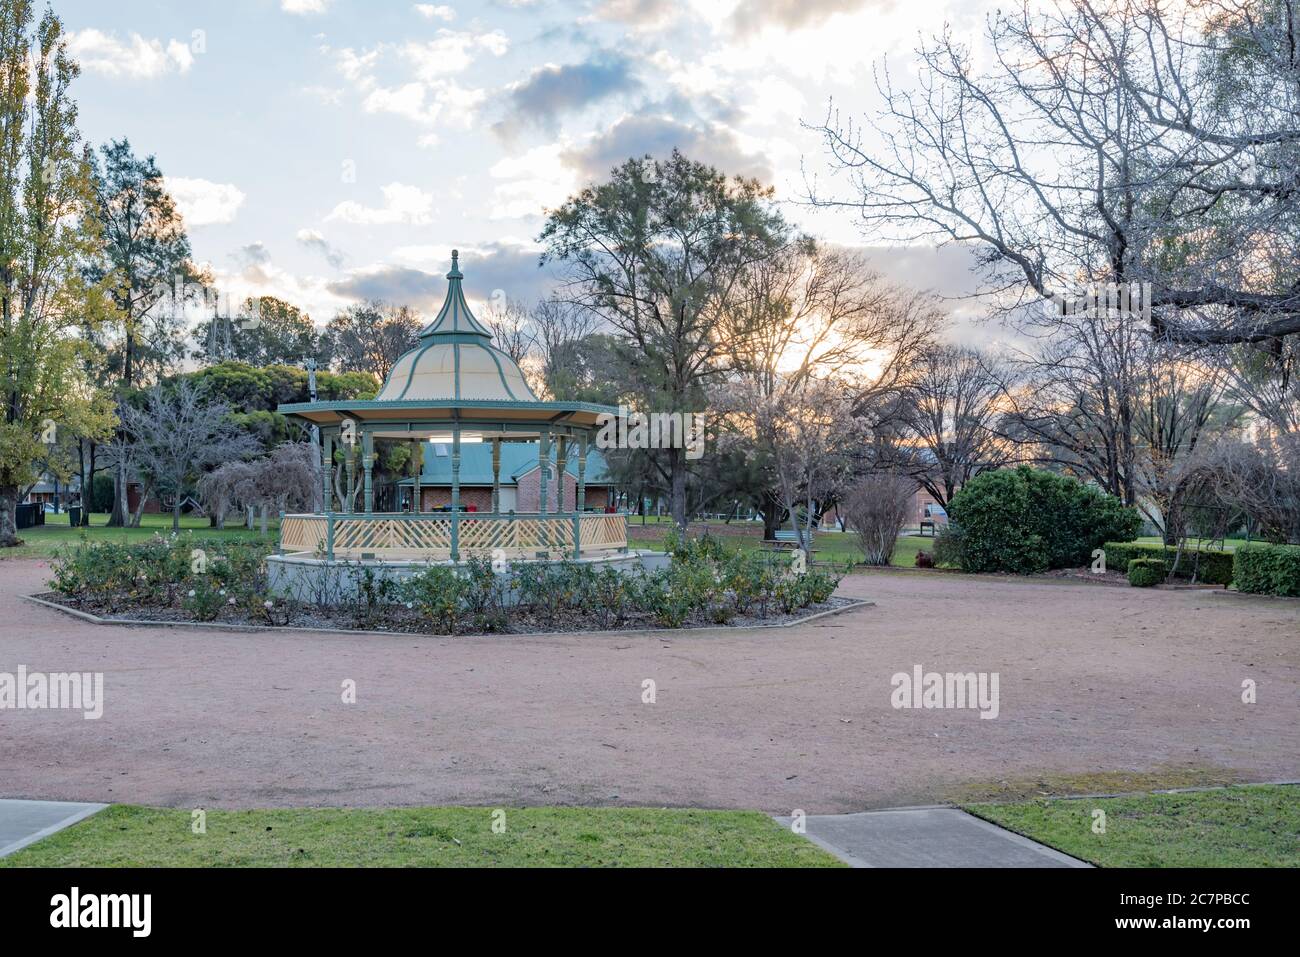 The 1903 heritage listed rotunda in Robertson Park in the mid western New South Wales town of Mudgee, Australia Stock Photo